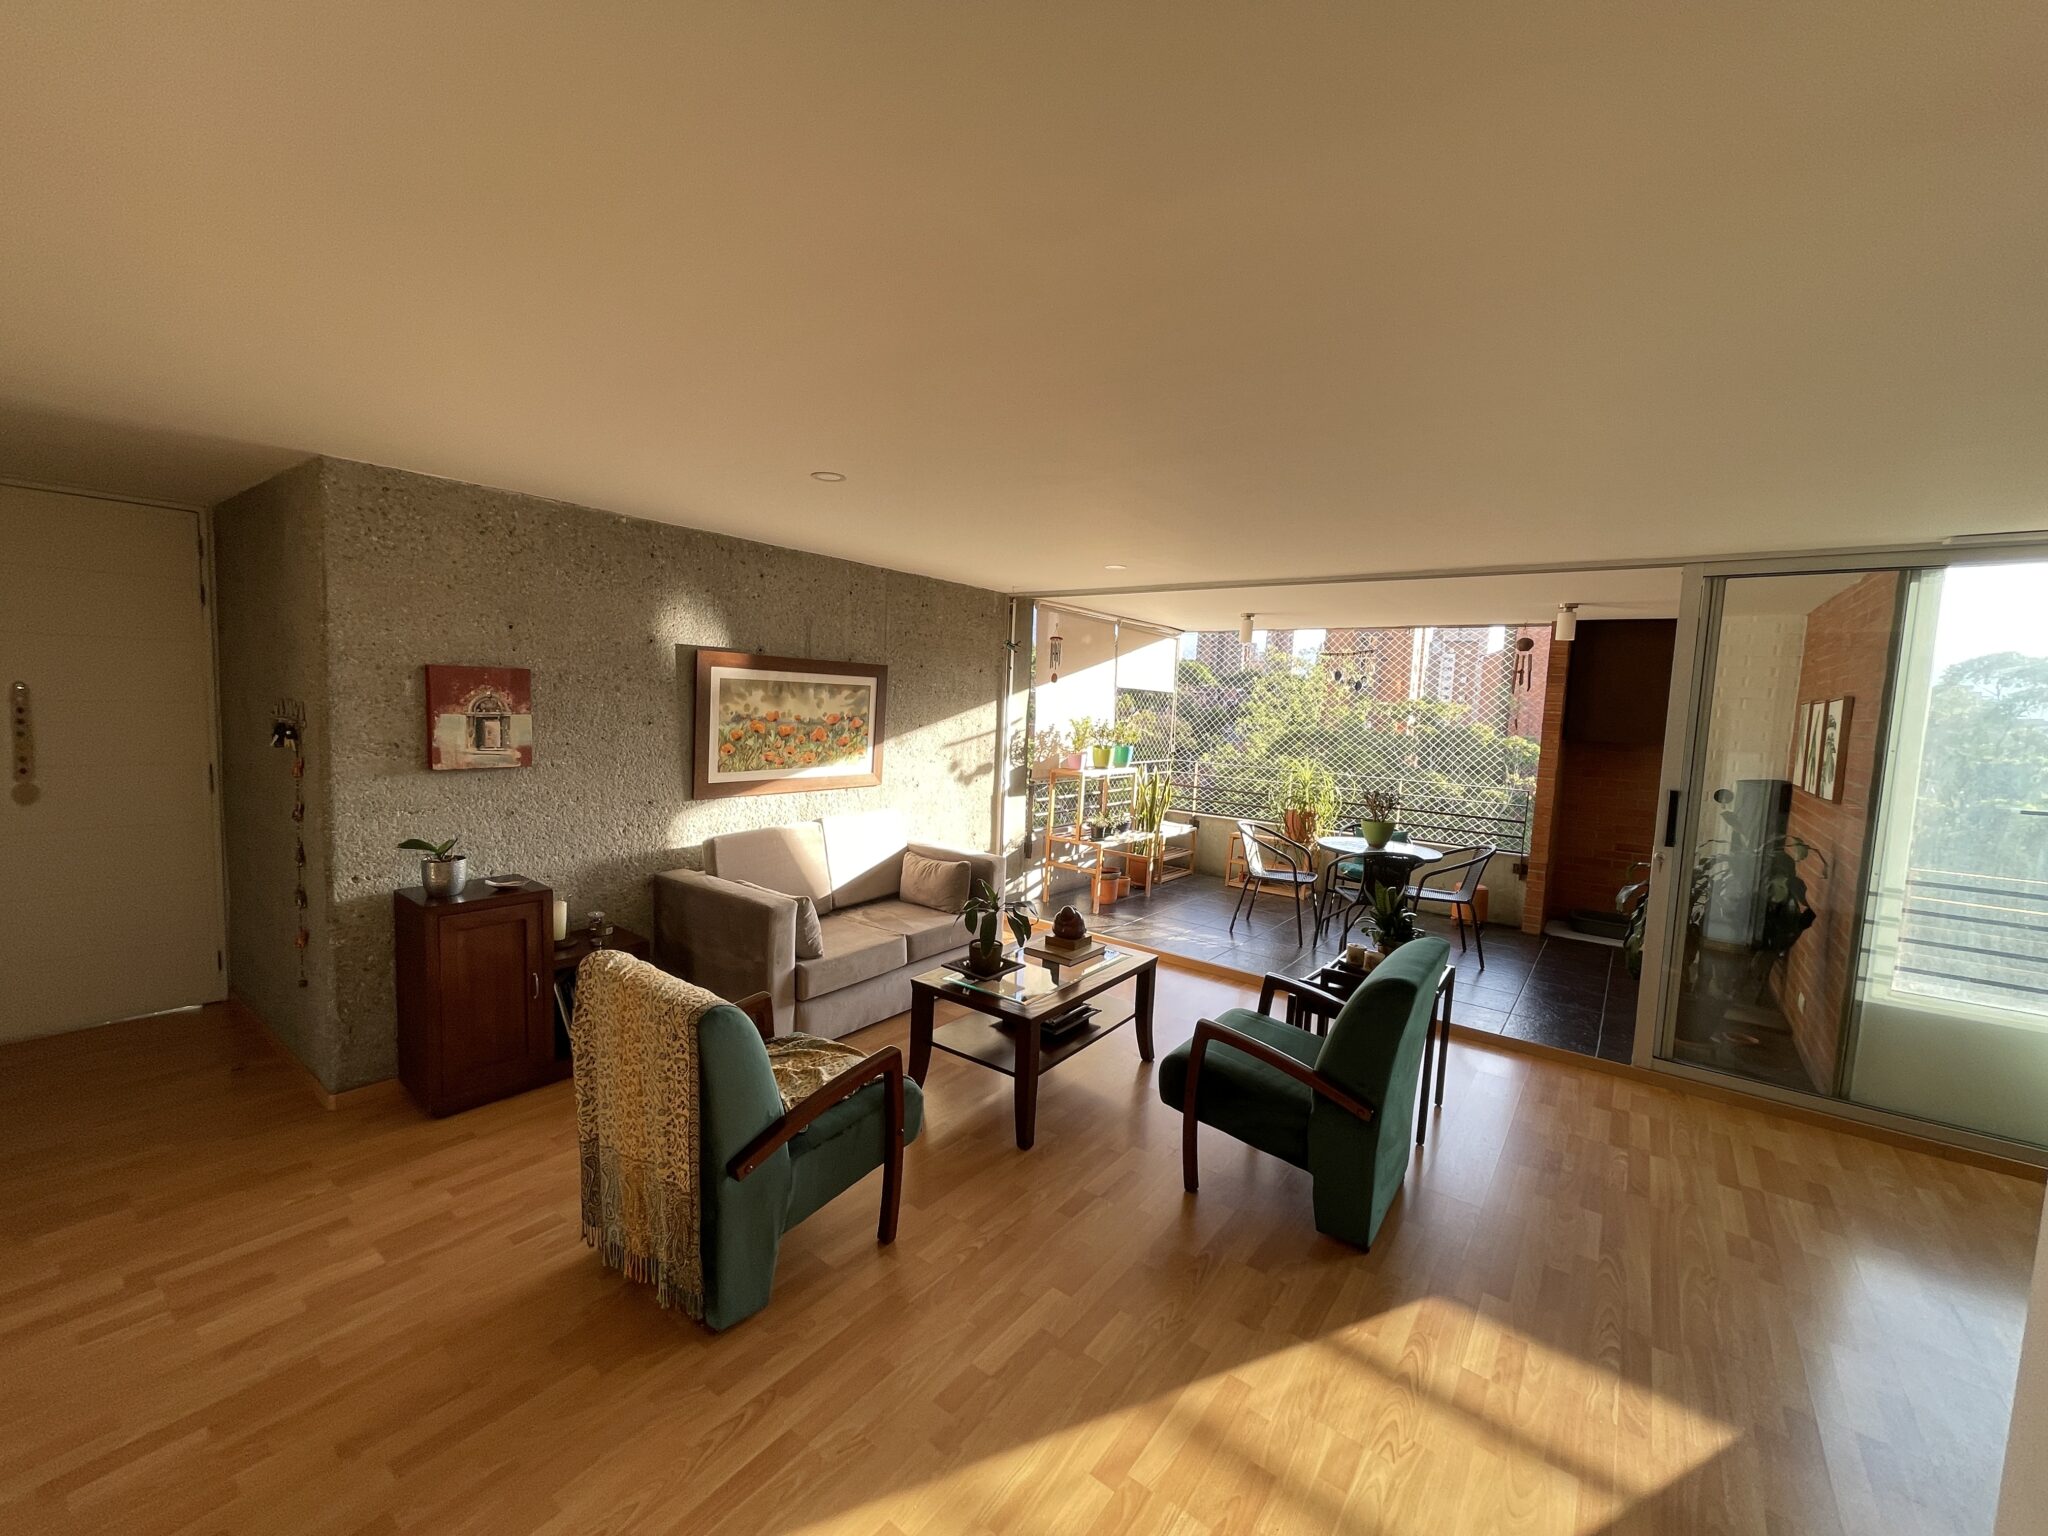 Well Priced, Spacious 2BR El Poblado Apartment Located in the Heart of Provenza With Two Units Per Floor